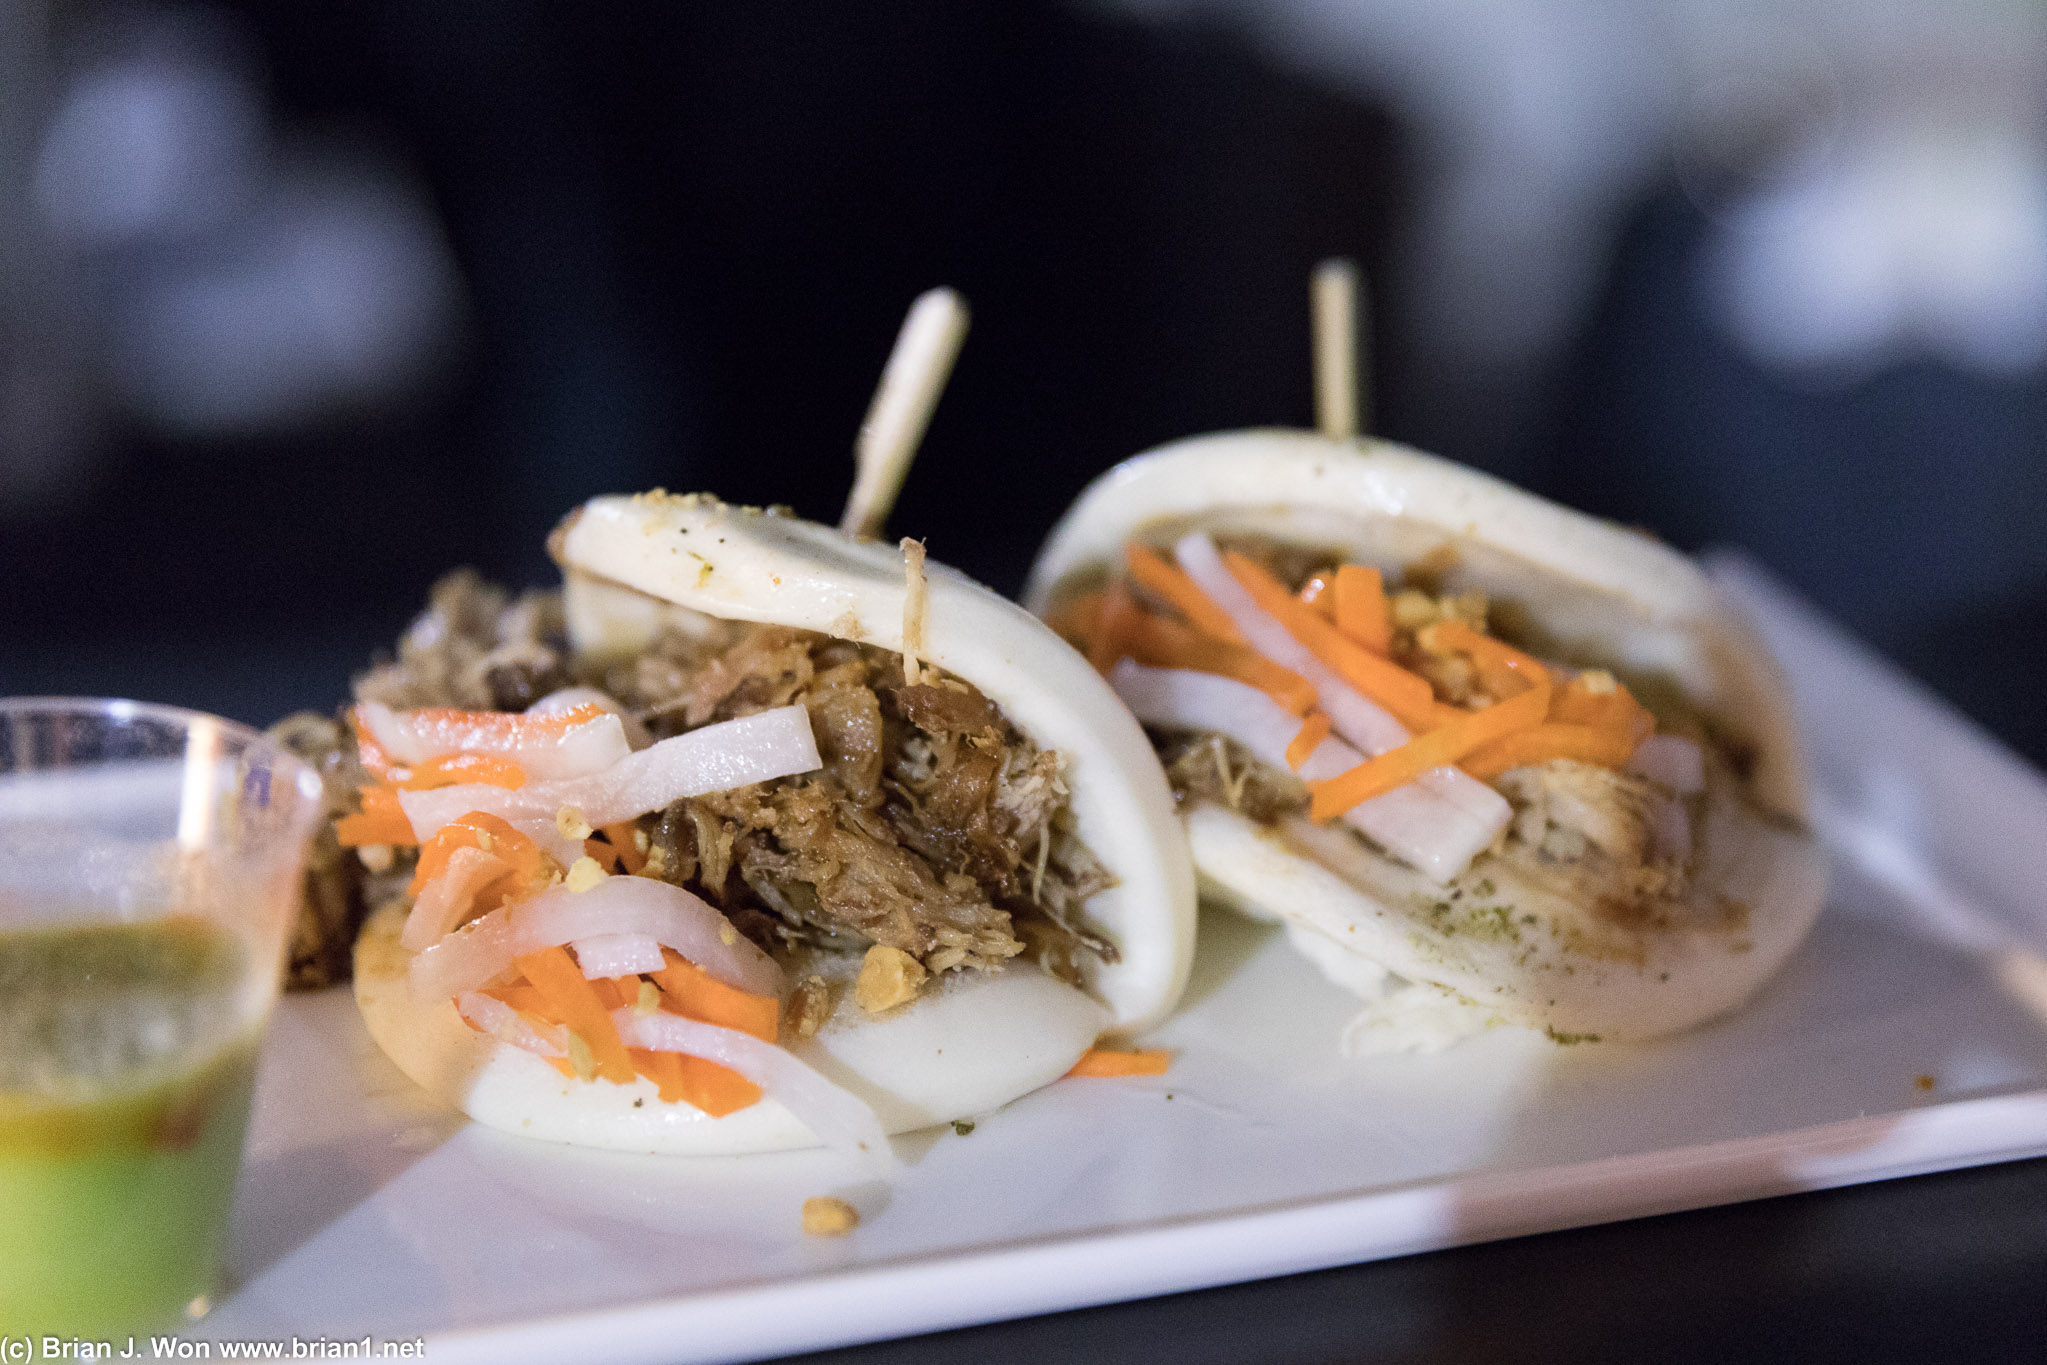 Pork buns from NYFC. Unremarkable.